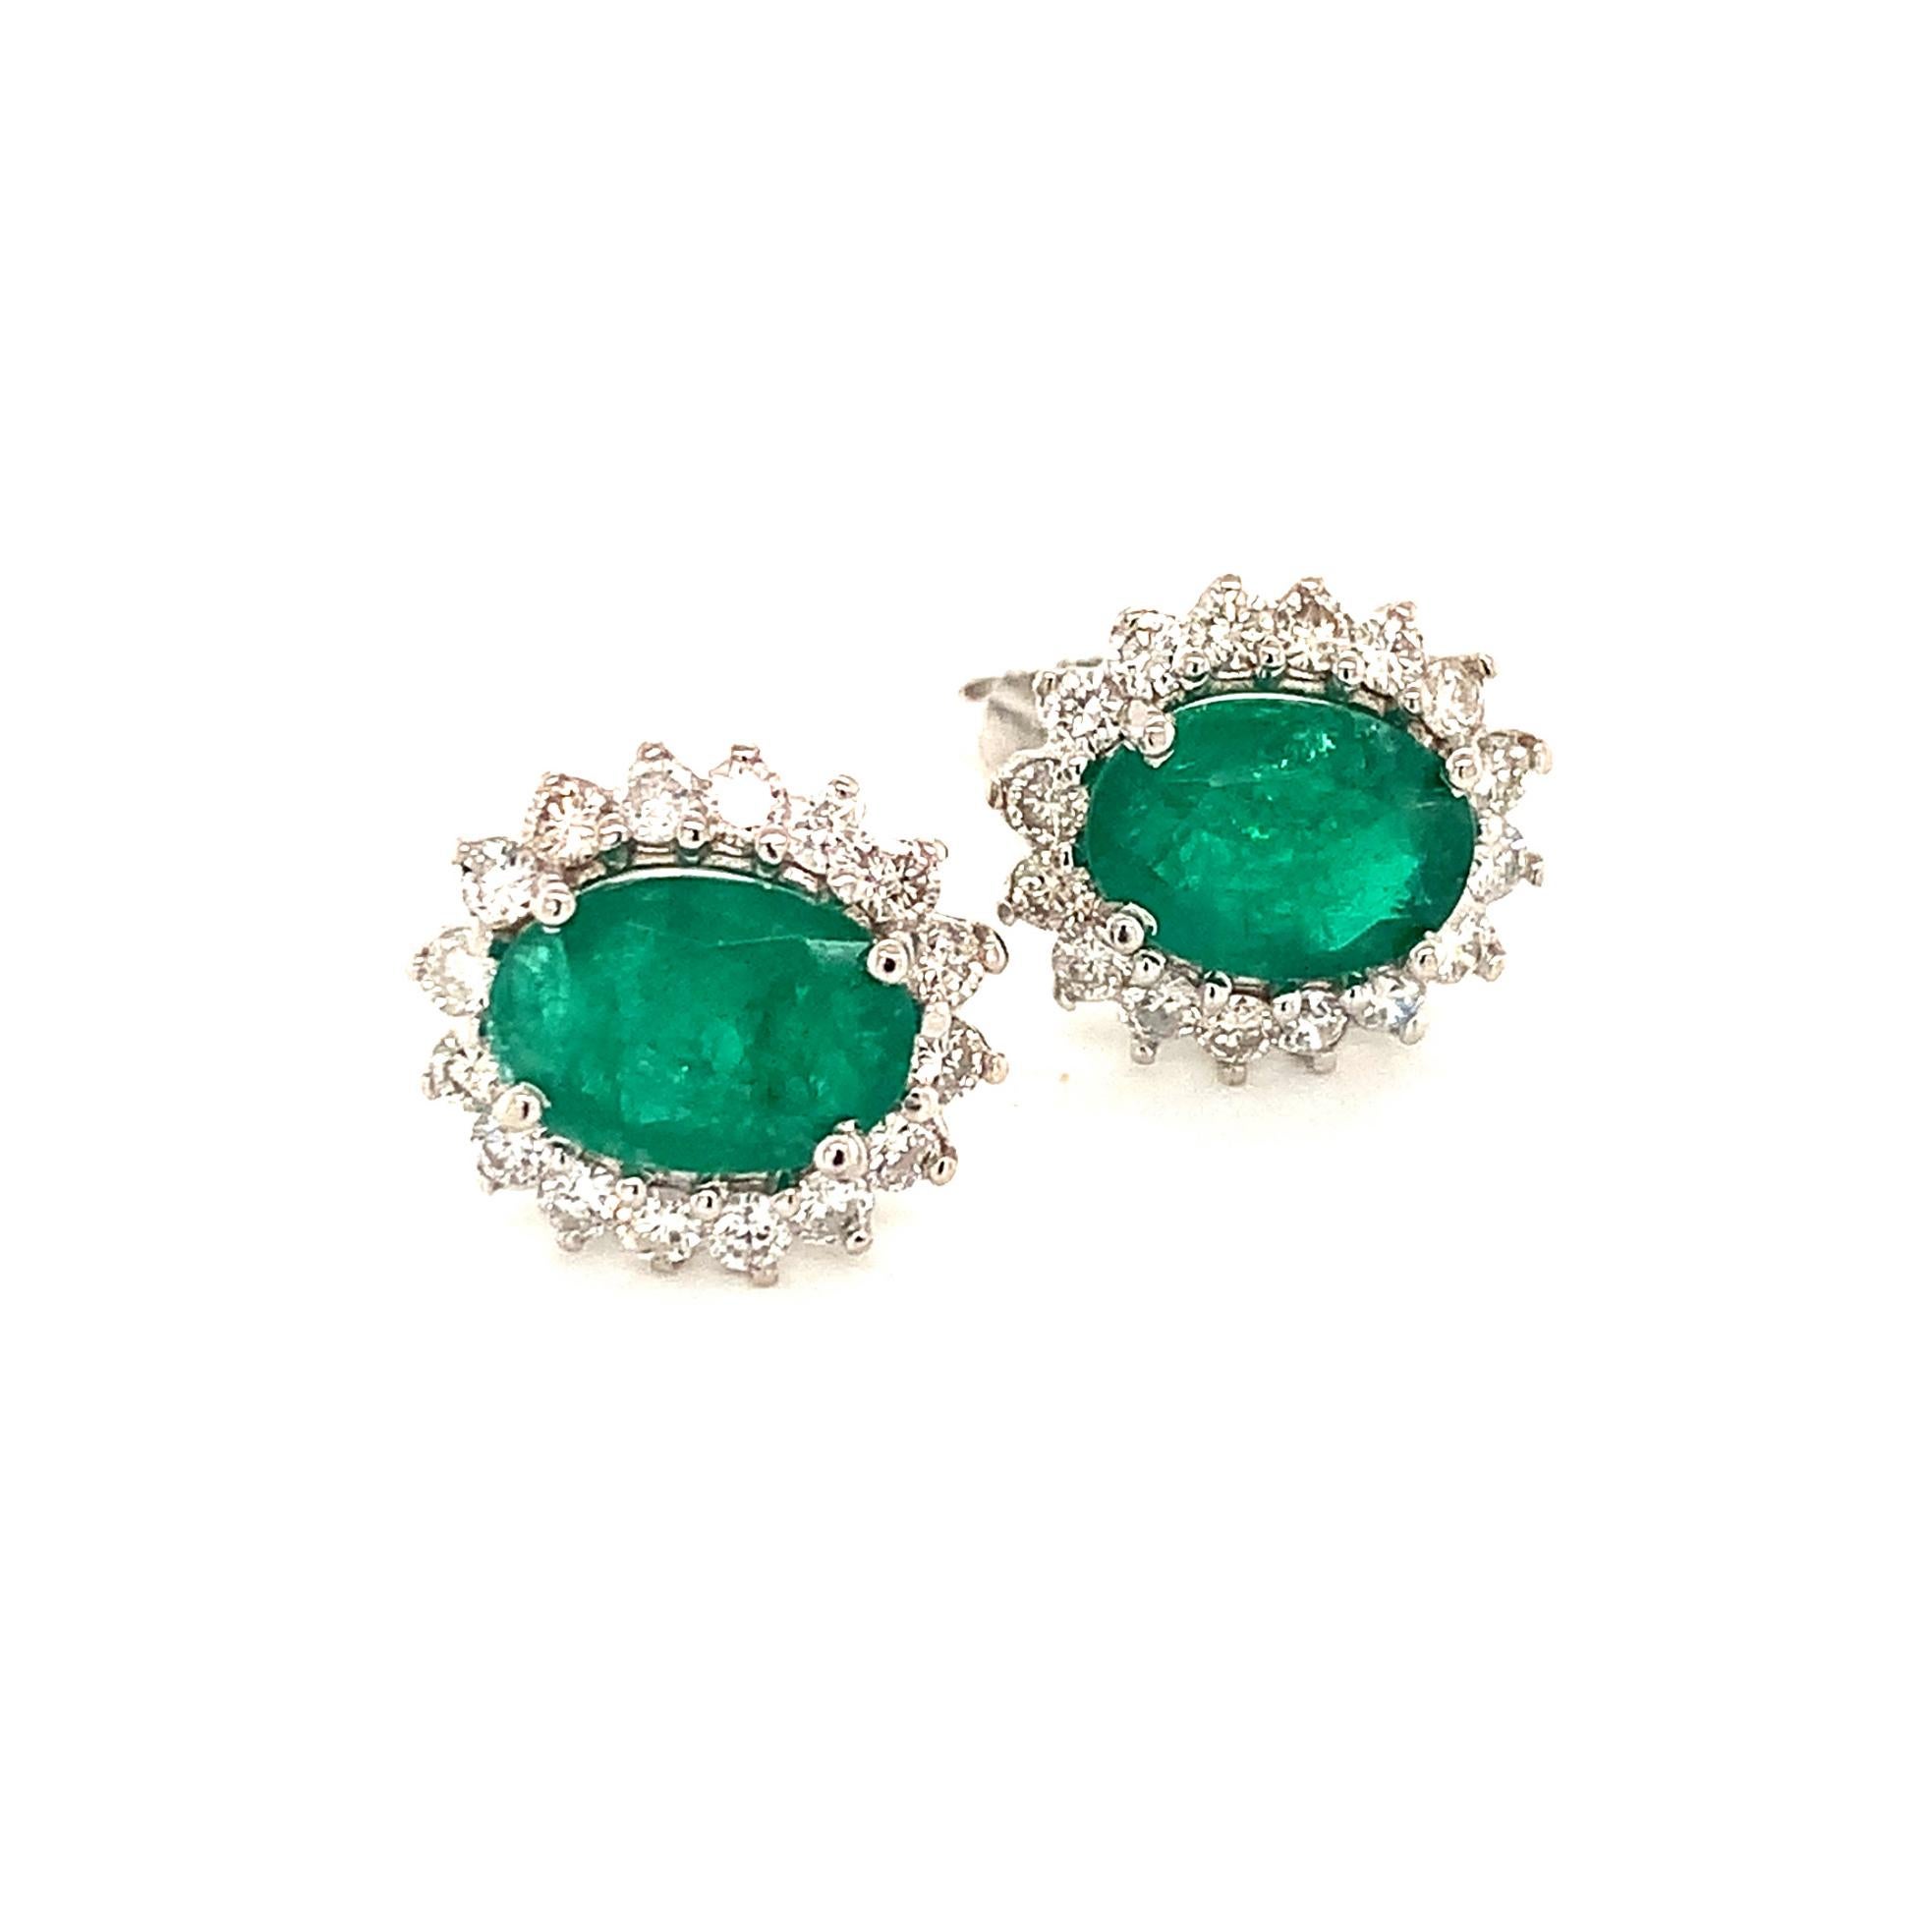 Natural Emerald Diamond Earrings 14k Gold 5.03 TCW Certified For Sale 3